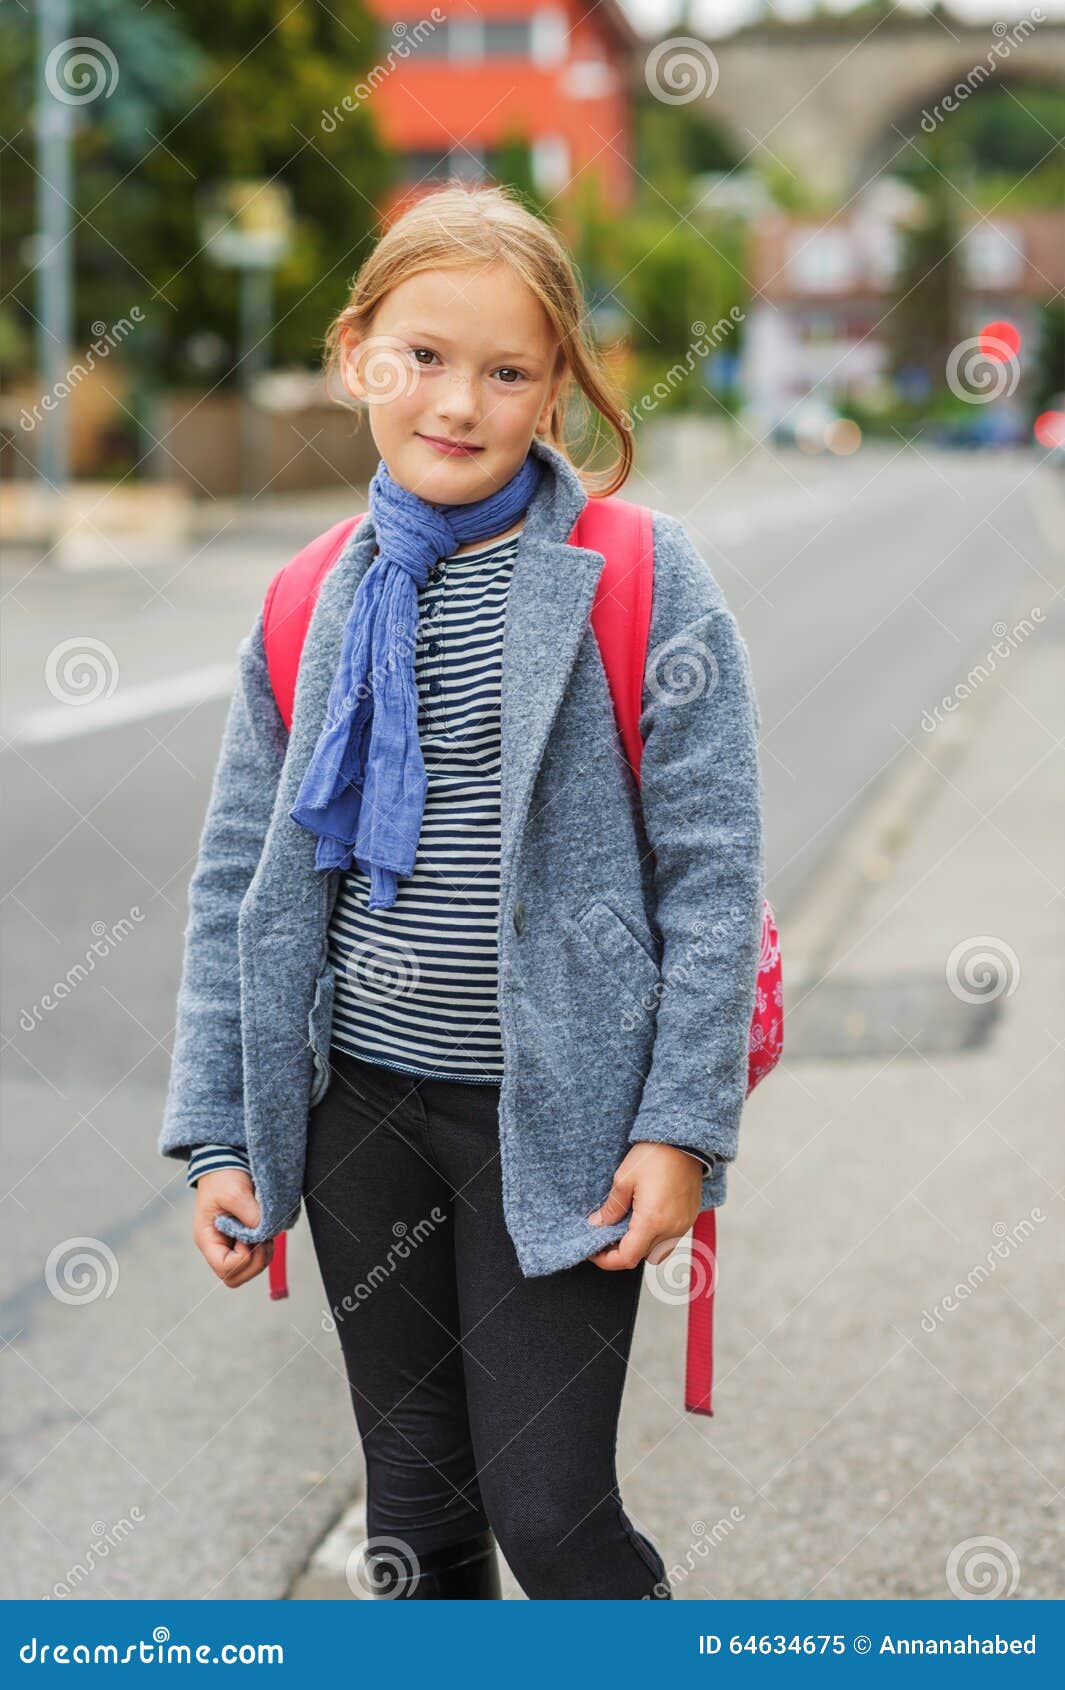 Portrait of a Cute Little Girl Stock Image - Image of clothing, happy ...